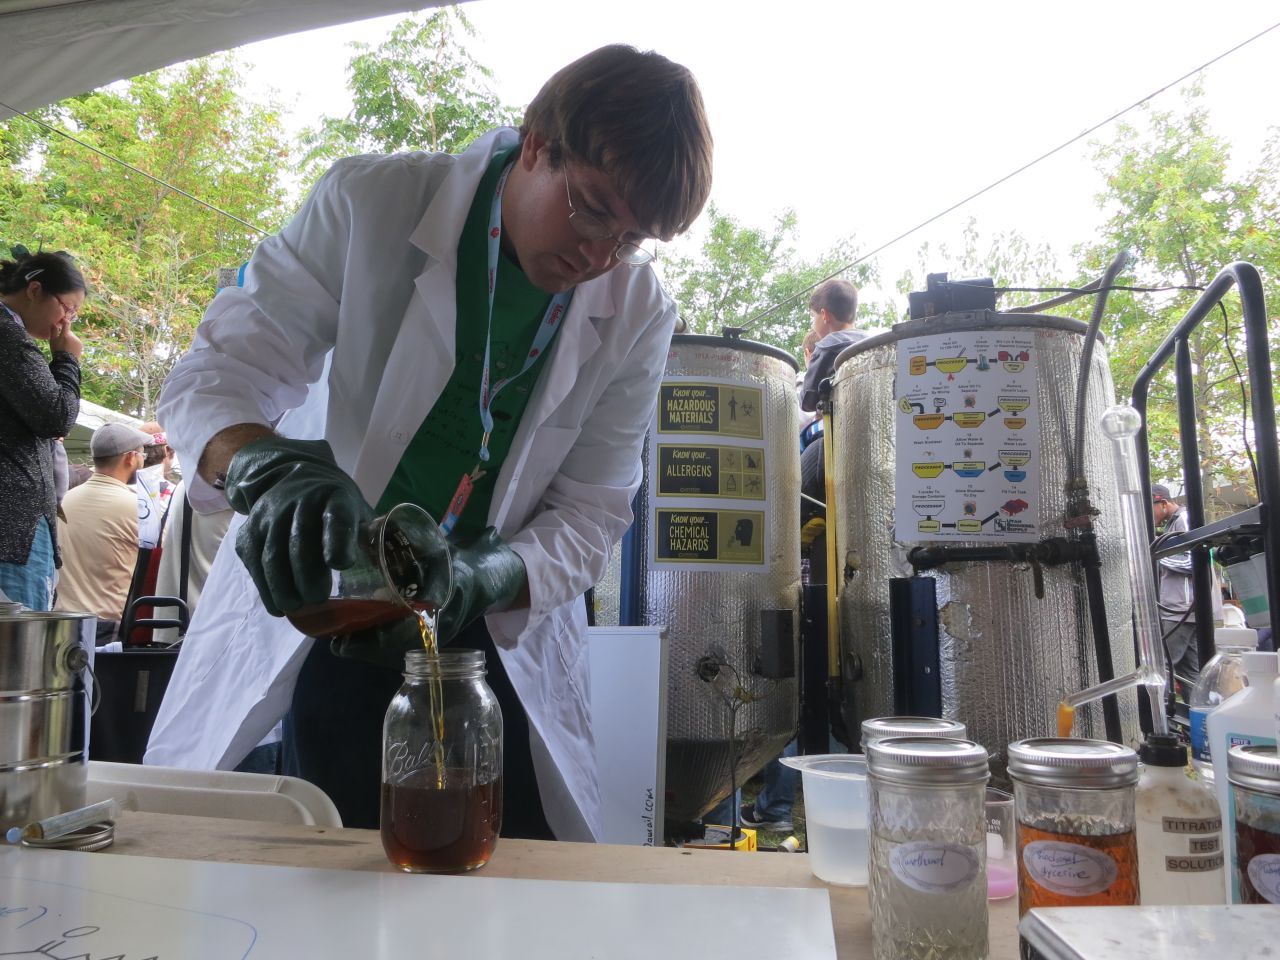 It's surprisingly easy to turn vegetable oil into biofuel as Ben Jorritsma, from Sussex County, New Jersey demonstrated.